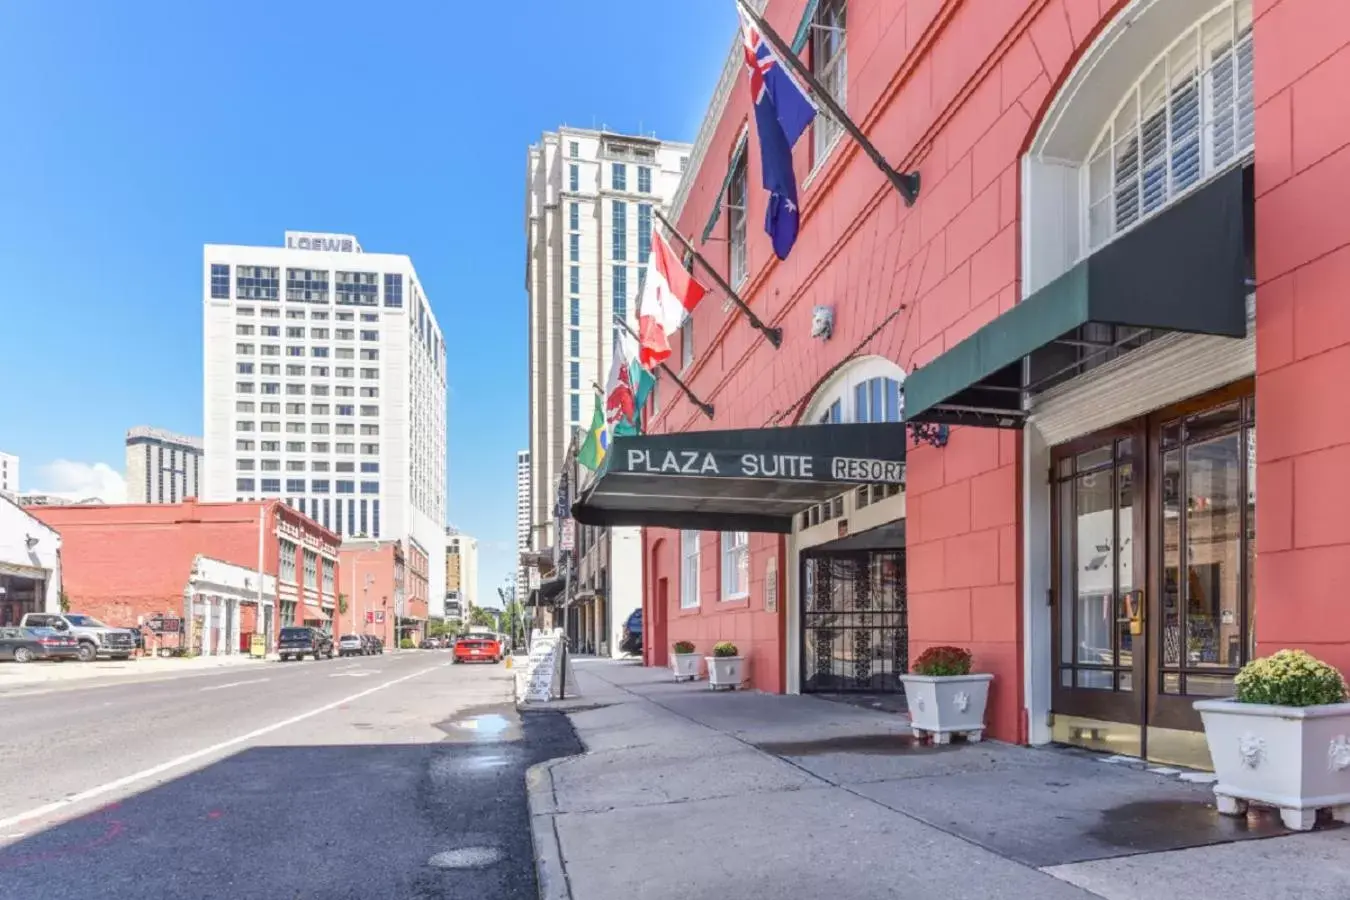 Property Building in Plaza Suites Downtown New Orleans